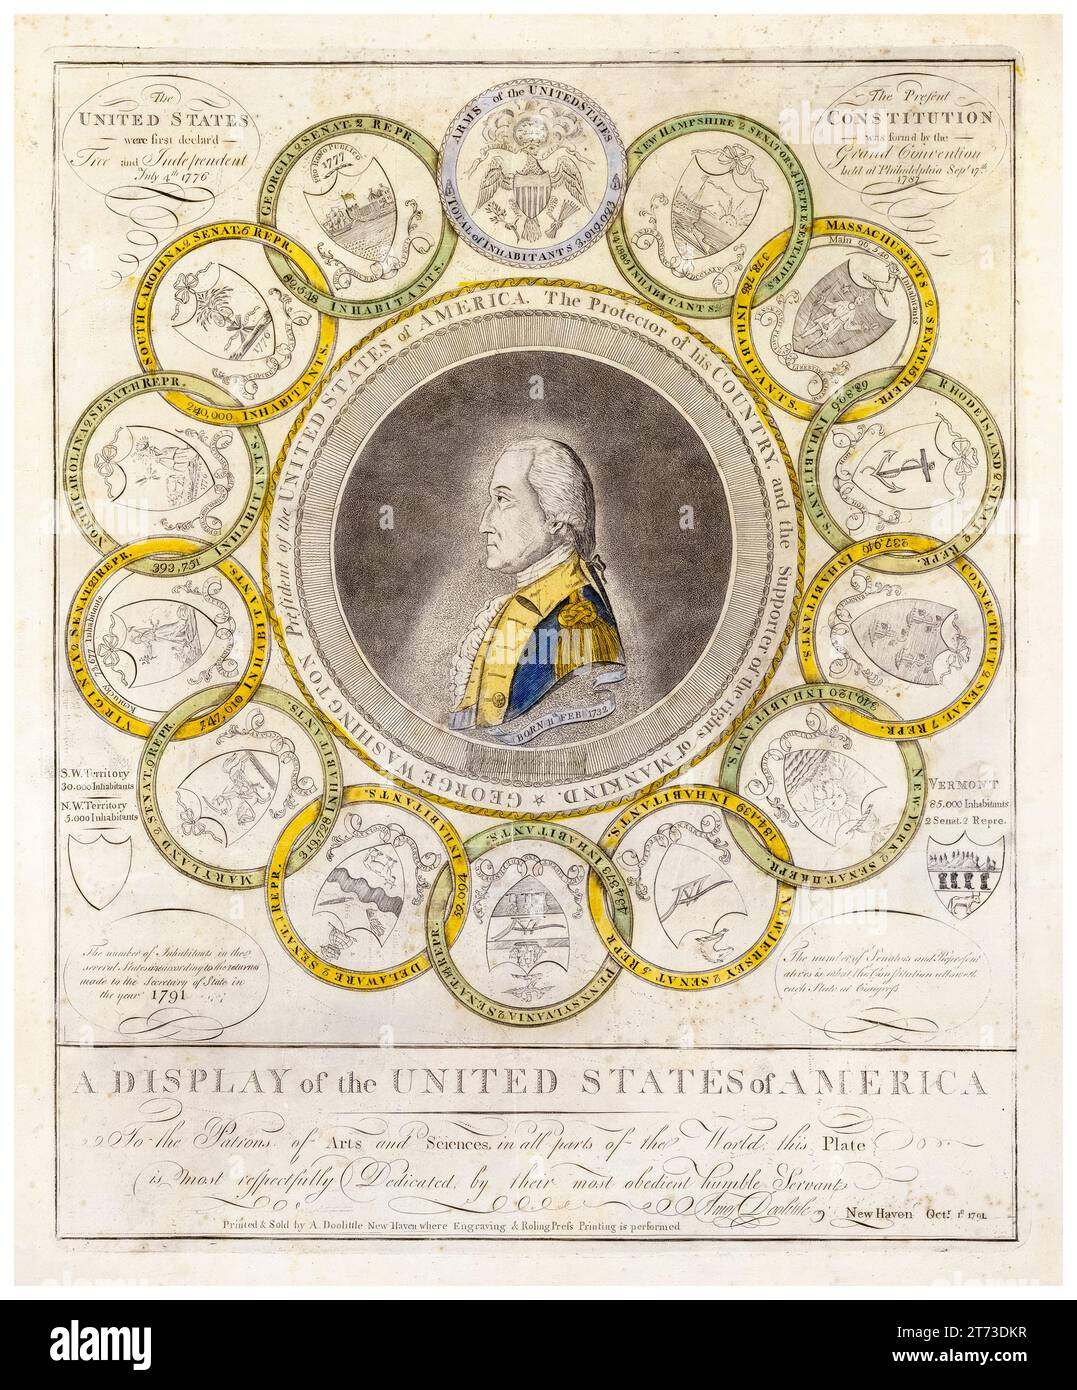 A Display of the United States of America, Coats of Arms of the Thirteen States and the Great Seal around a portrait of George Washington, engraving by Amos Doolittle, 1791 Stock Photo